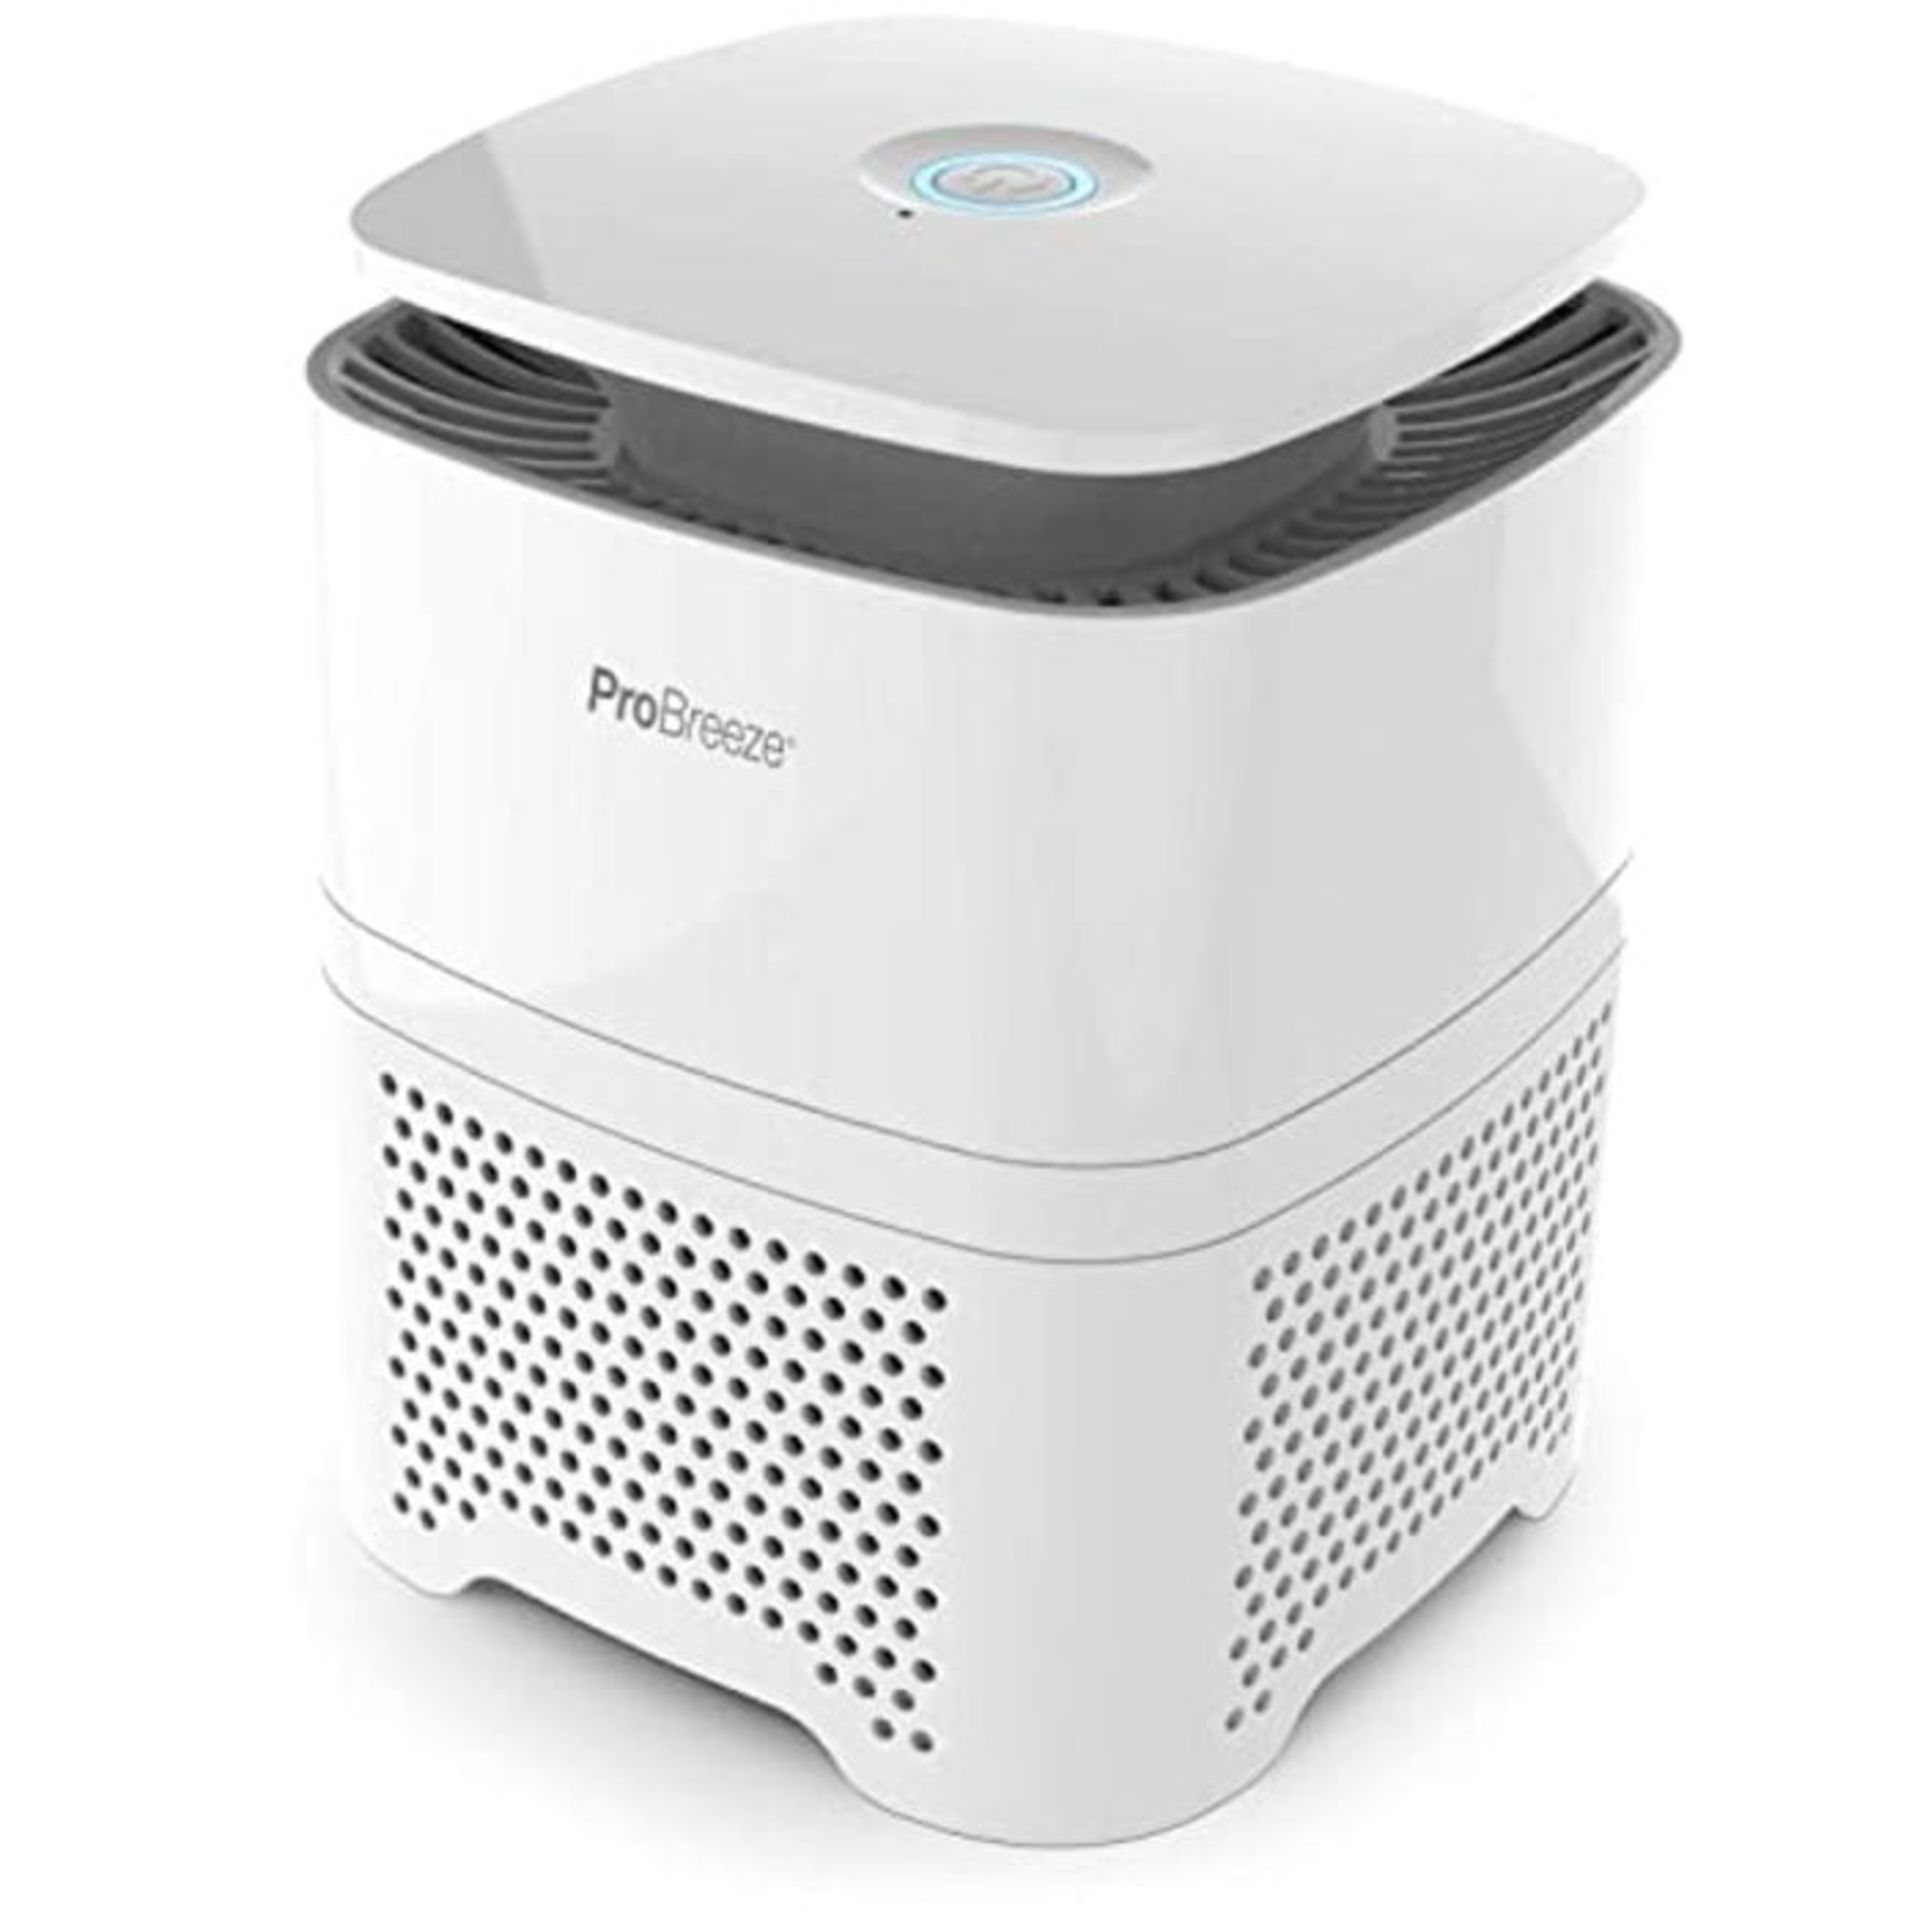 Pro Breeze® Air Purifier for Home, 4-in-1 with Pre, True HEPA & Active Carbon Filter